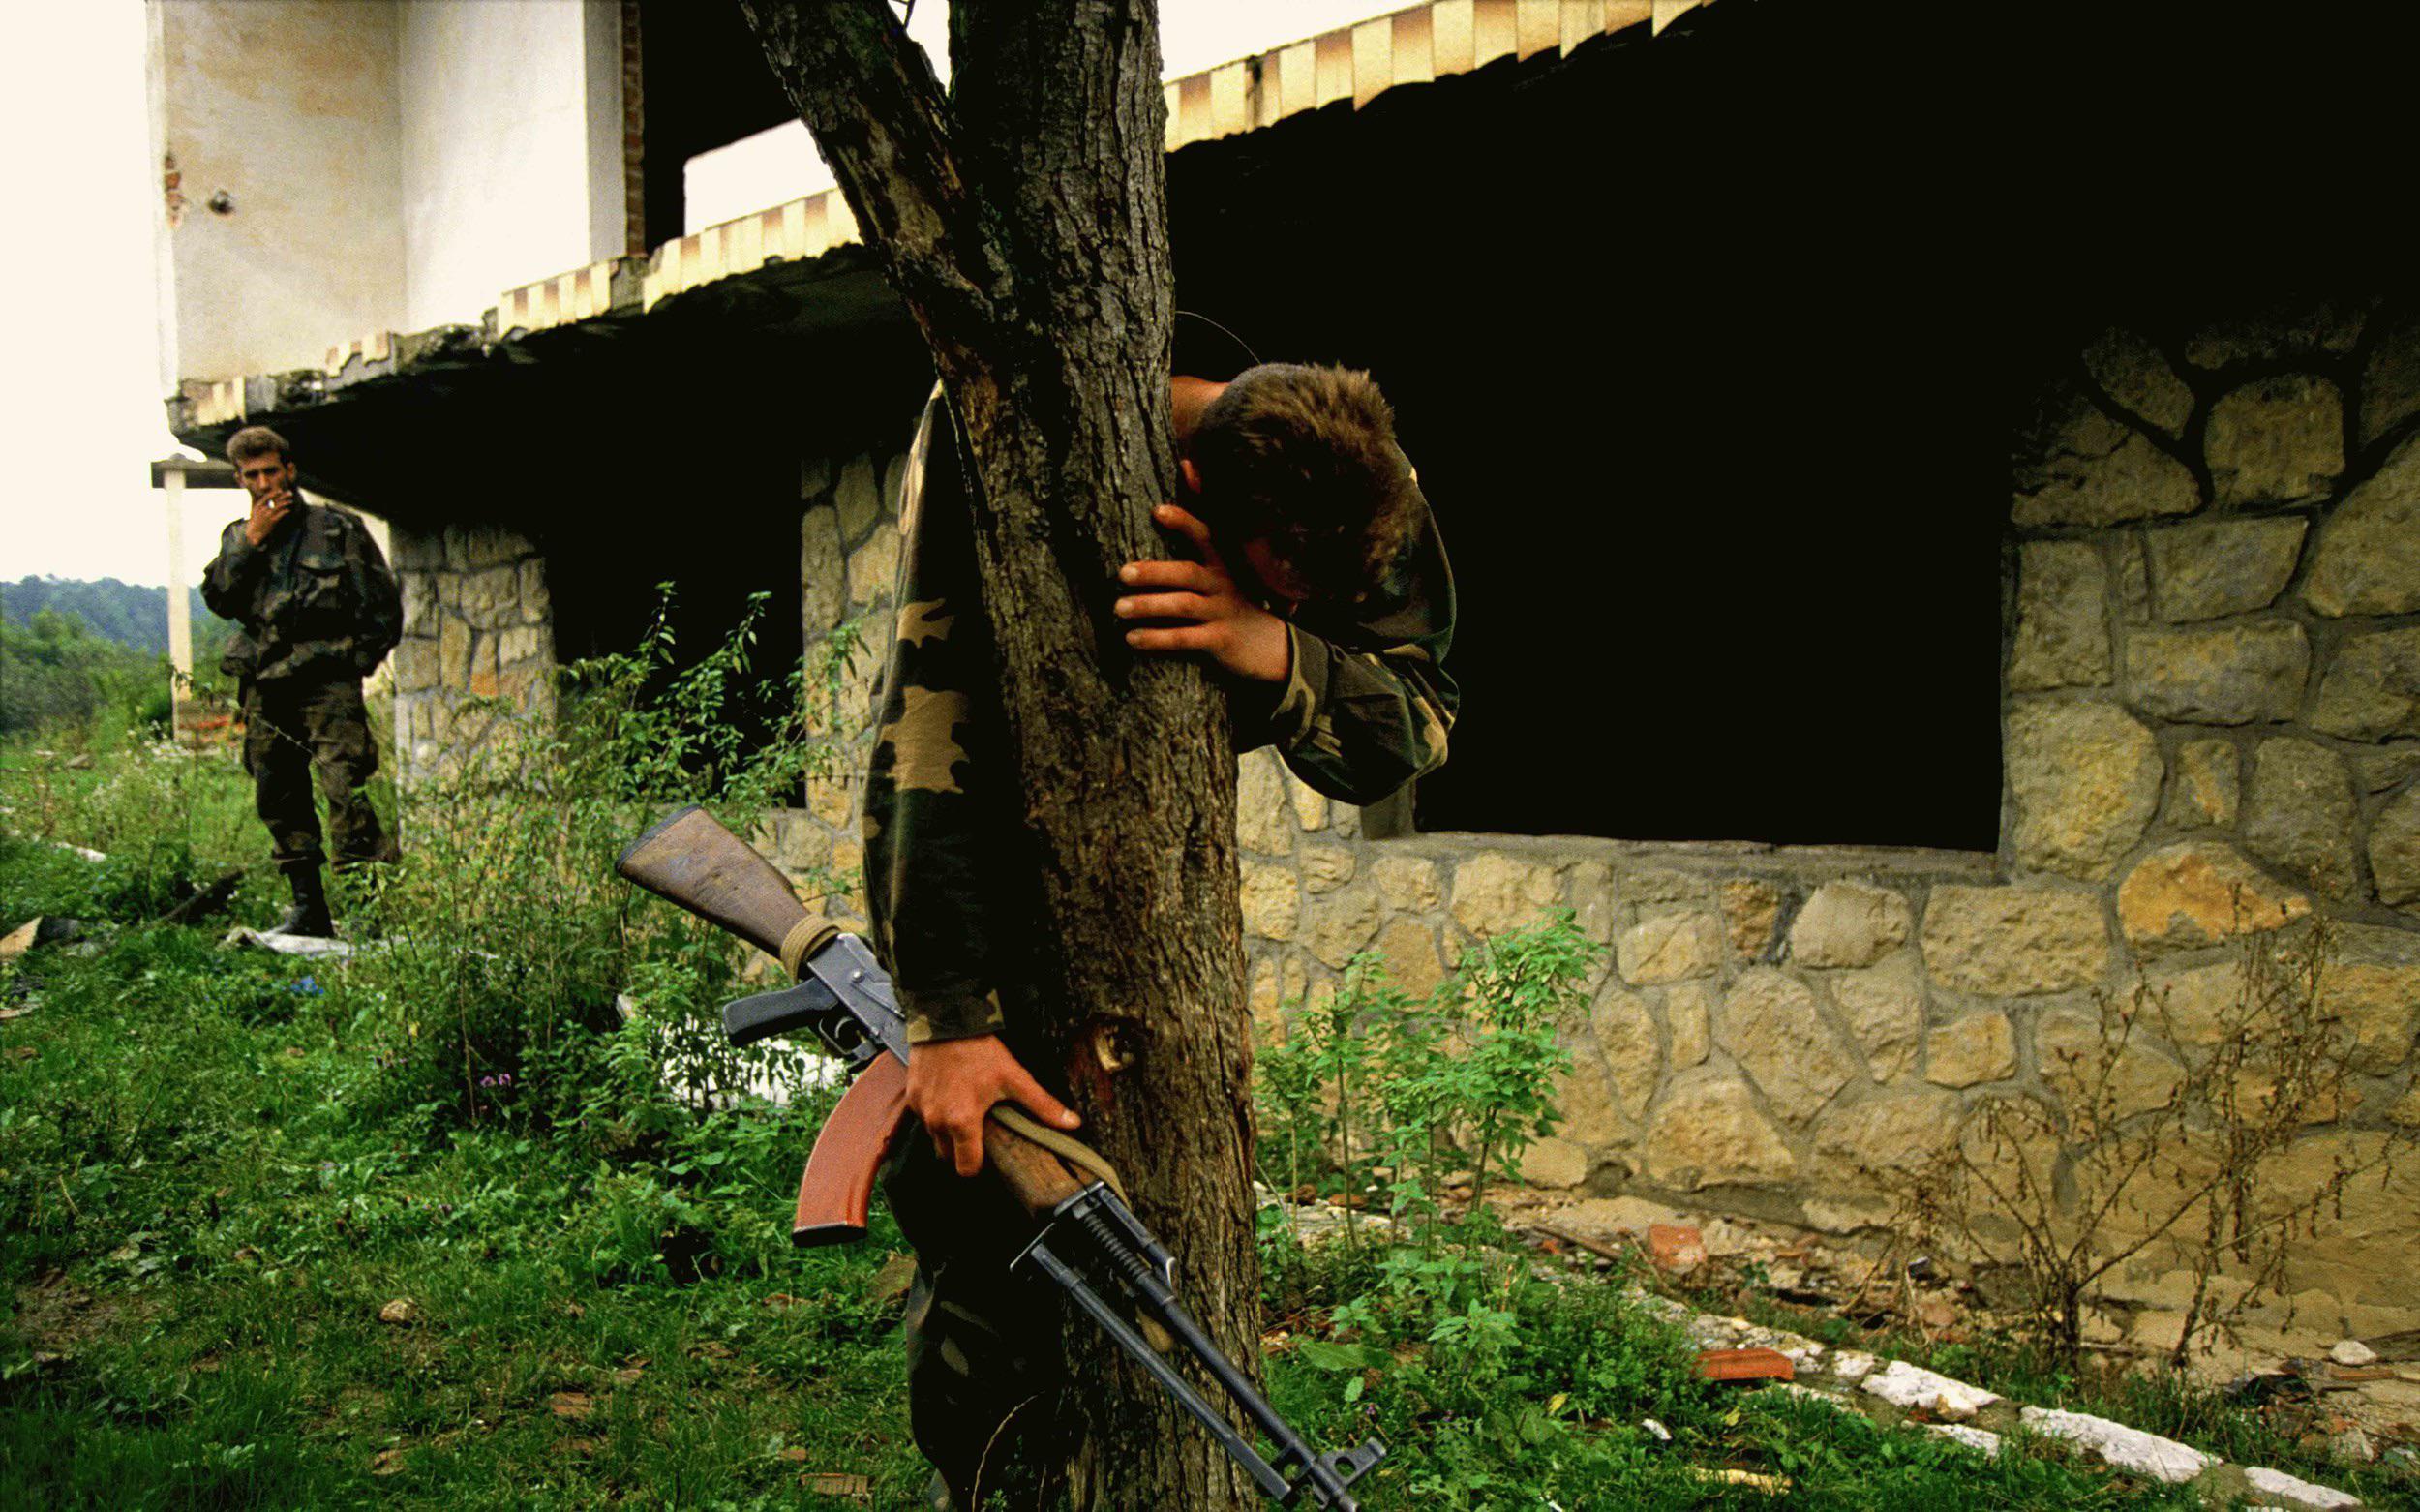 A Bosnian Soldier hugs tree and cries. War is Hell.